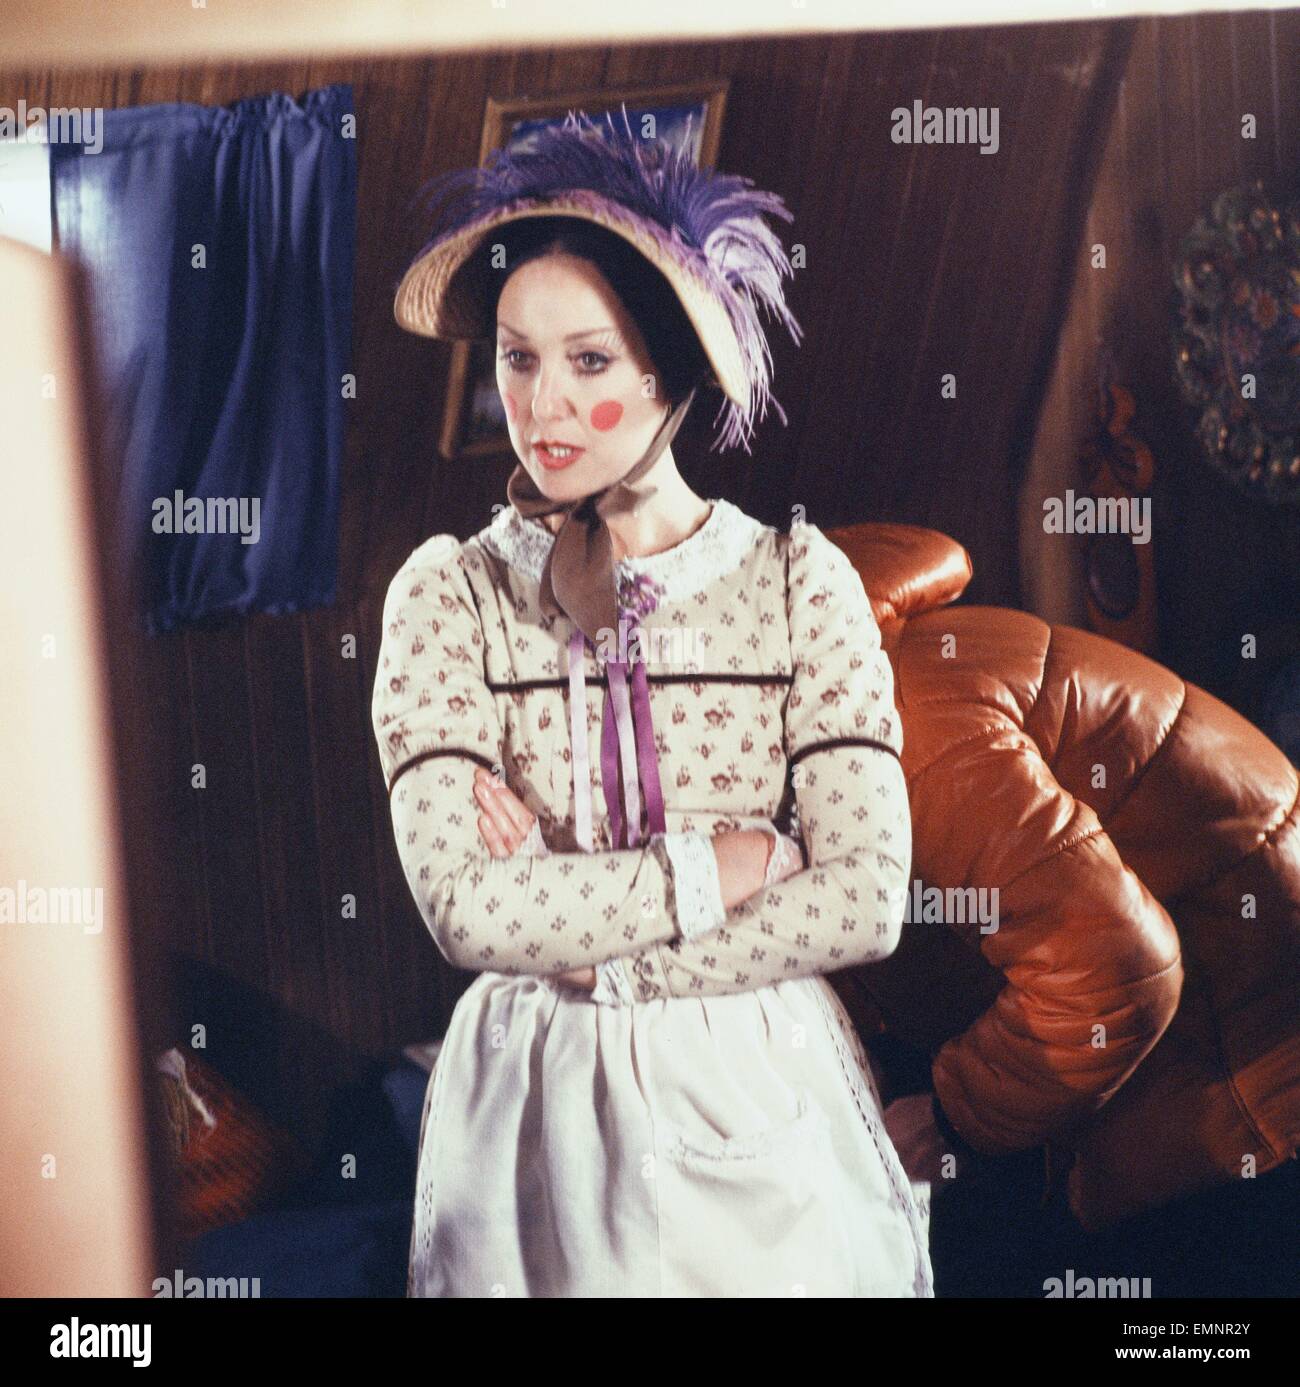 Actress Una Stubb as Aunt Sally in the Southern Television series of Worzel Gummidge. Aunt Sally was a life-size fairground doll and Worzel's femme fatale. 21st October 1980 Stock Photo